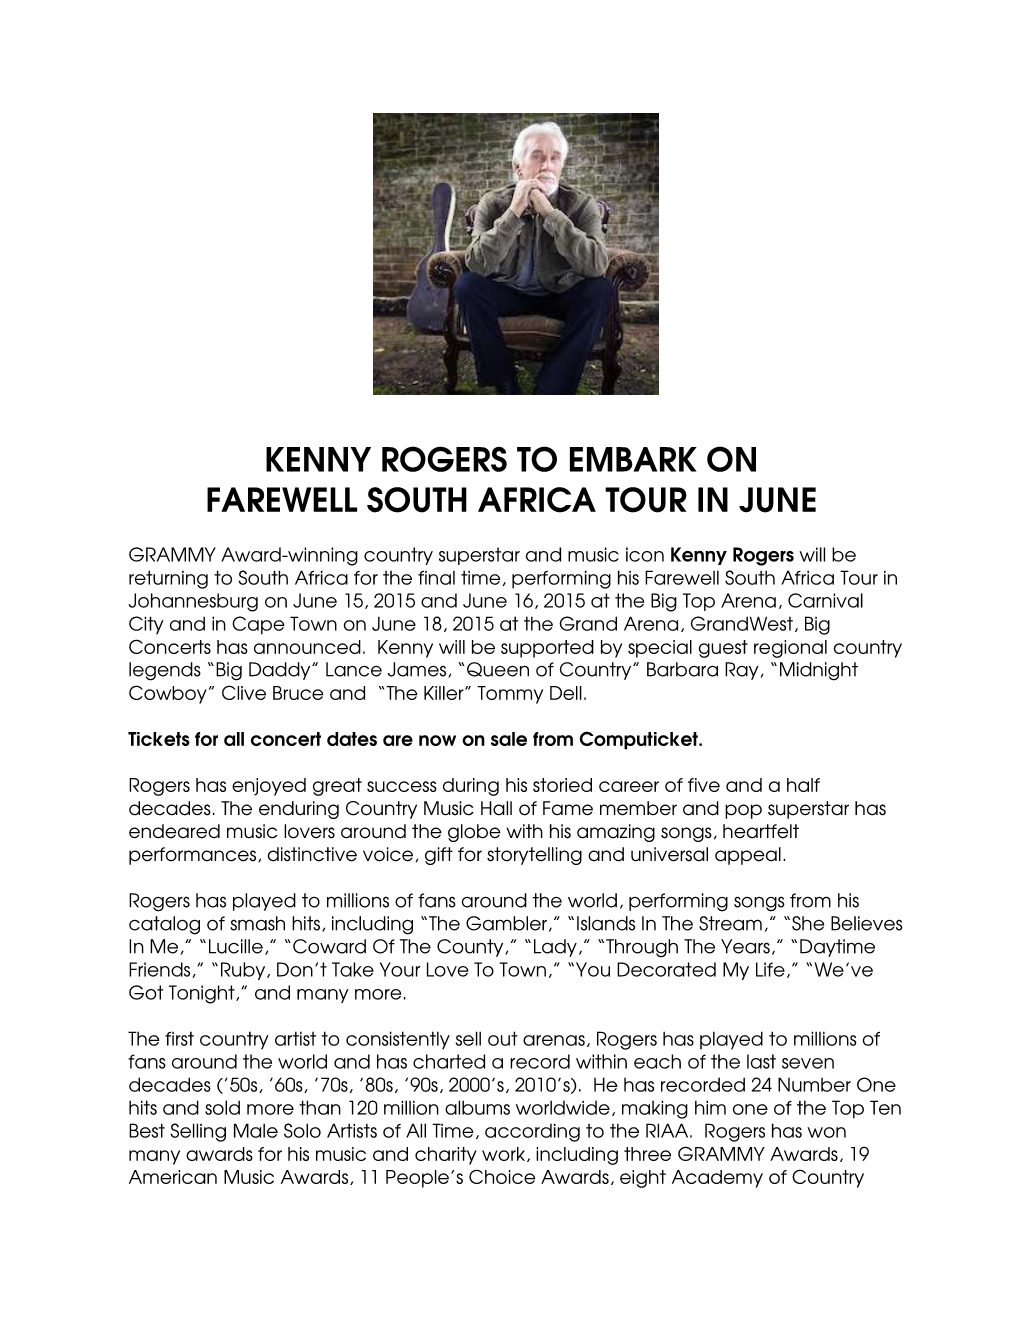 Kenny Rogers to Embark on Farewell South Africa Tour in June